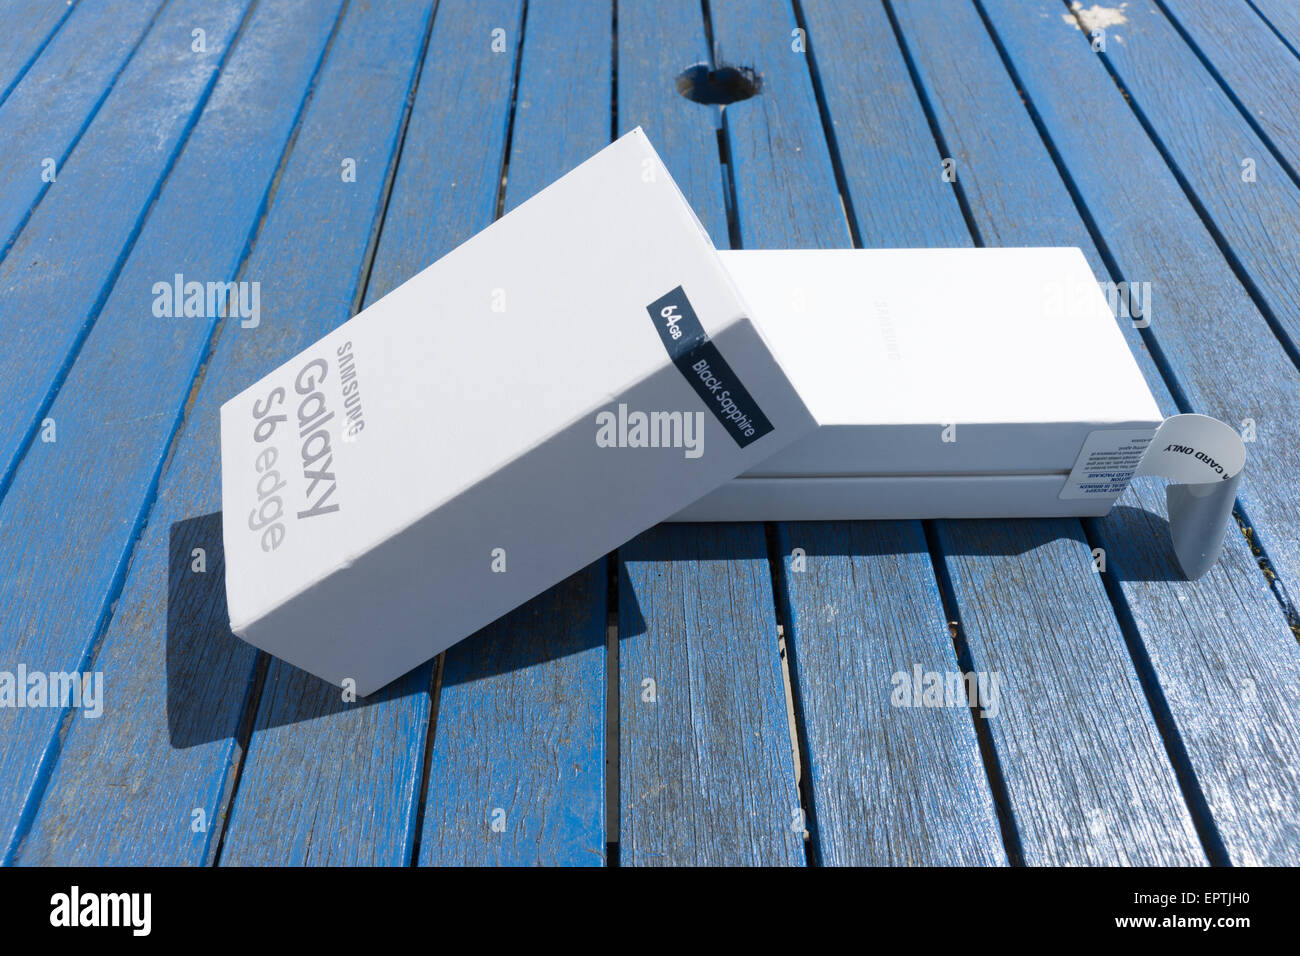 Unboxing the samsung gaxley edge S6 first look Stock Photo